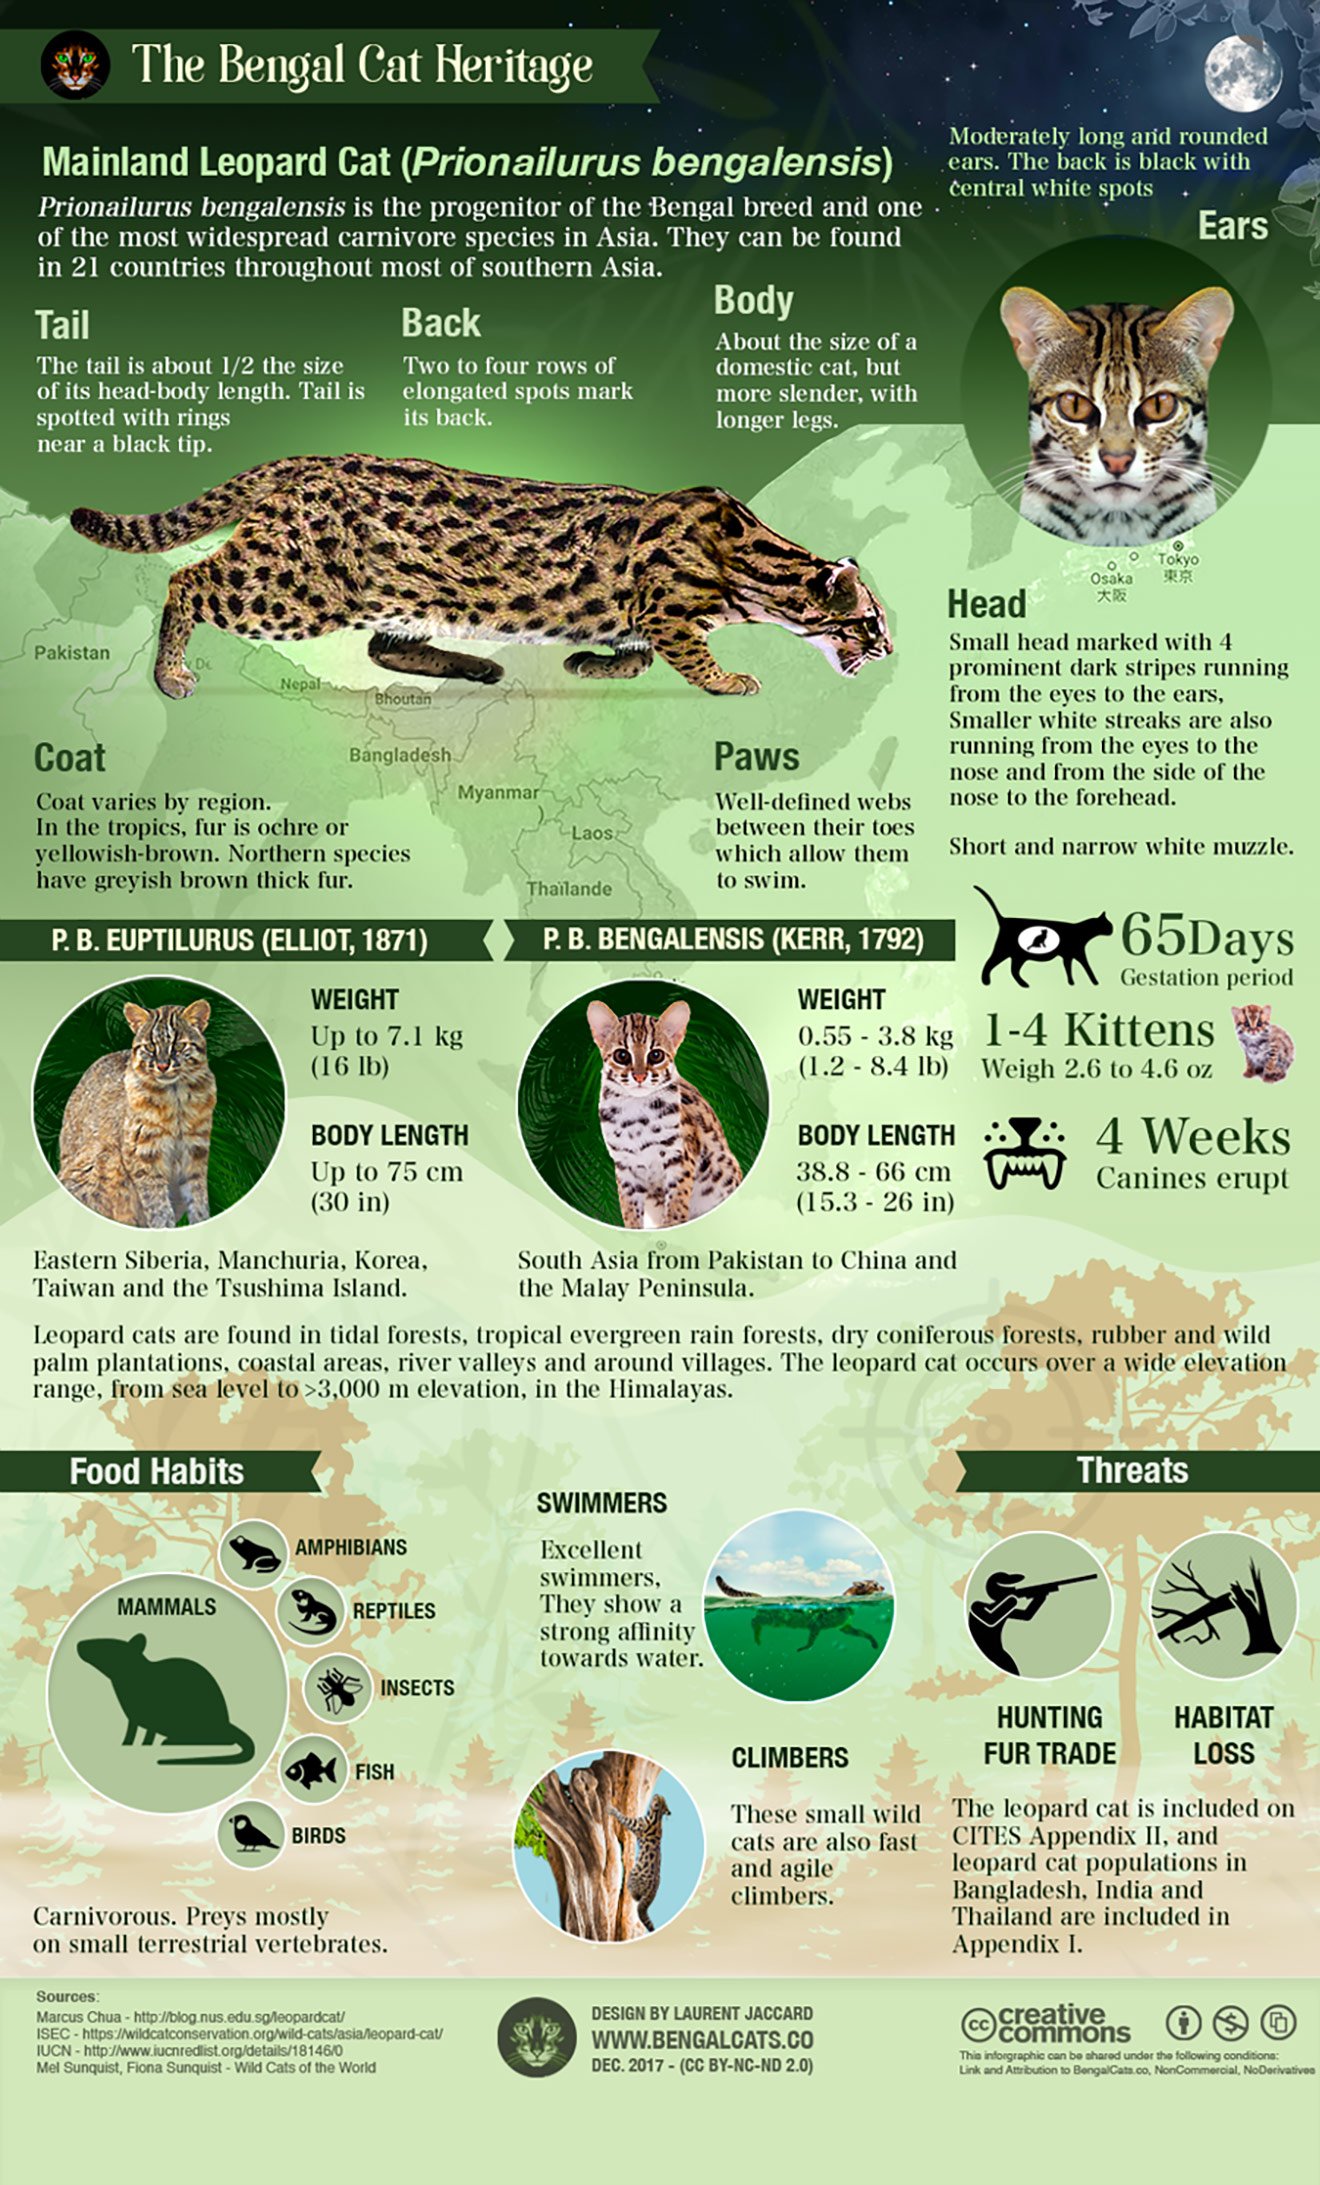 Infographic about the Leopard cat (Prionailurus bengalensis)